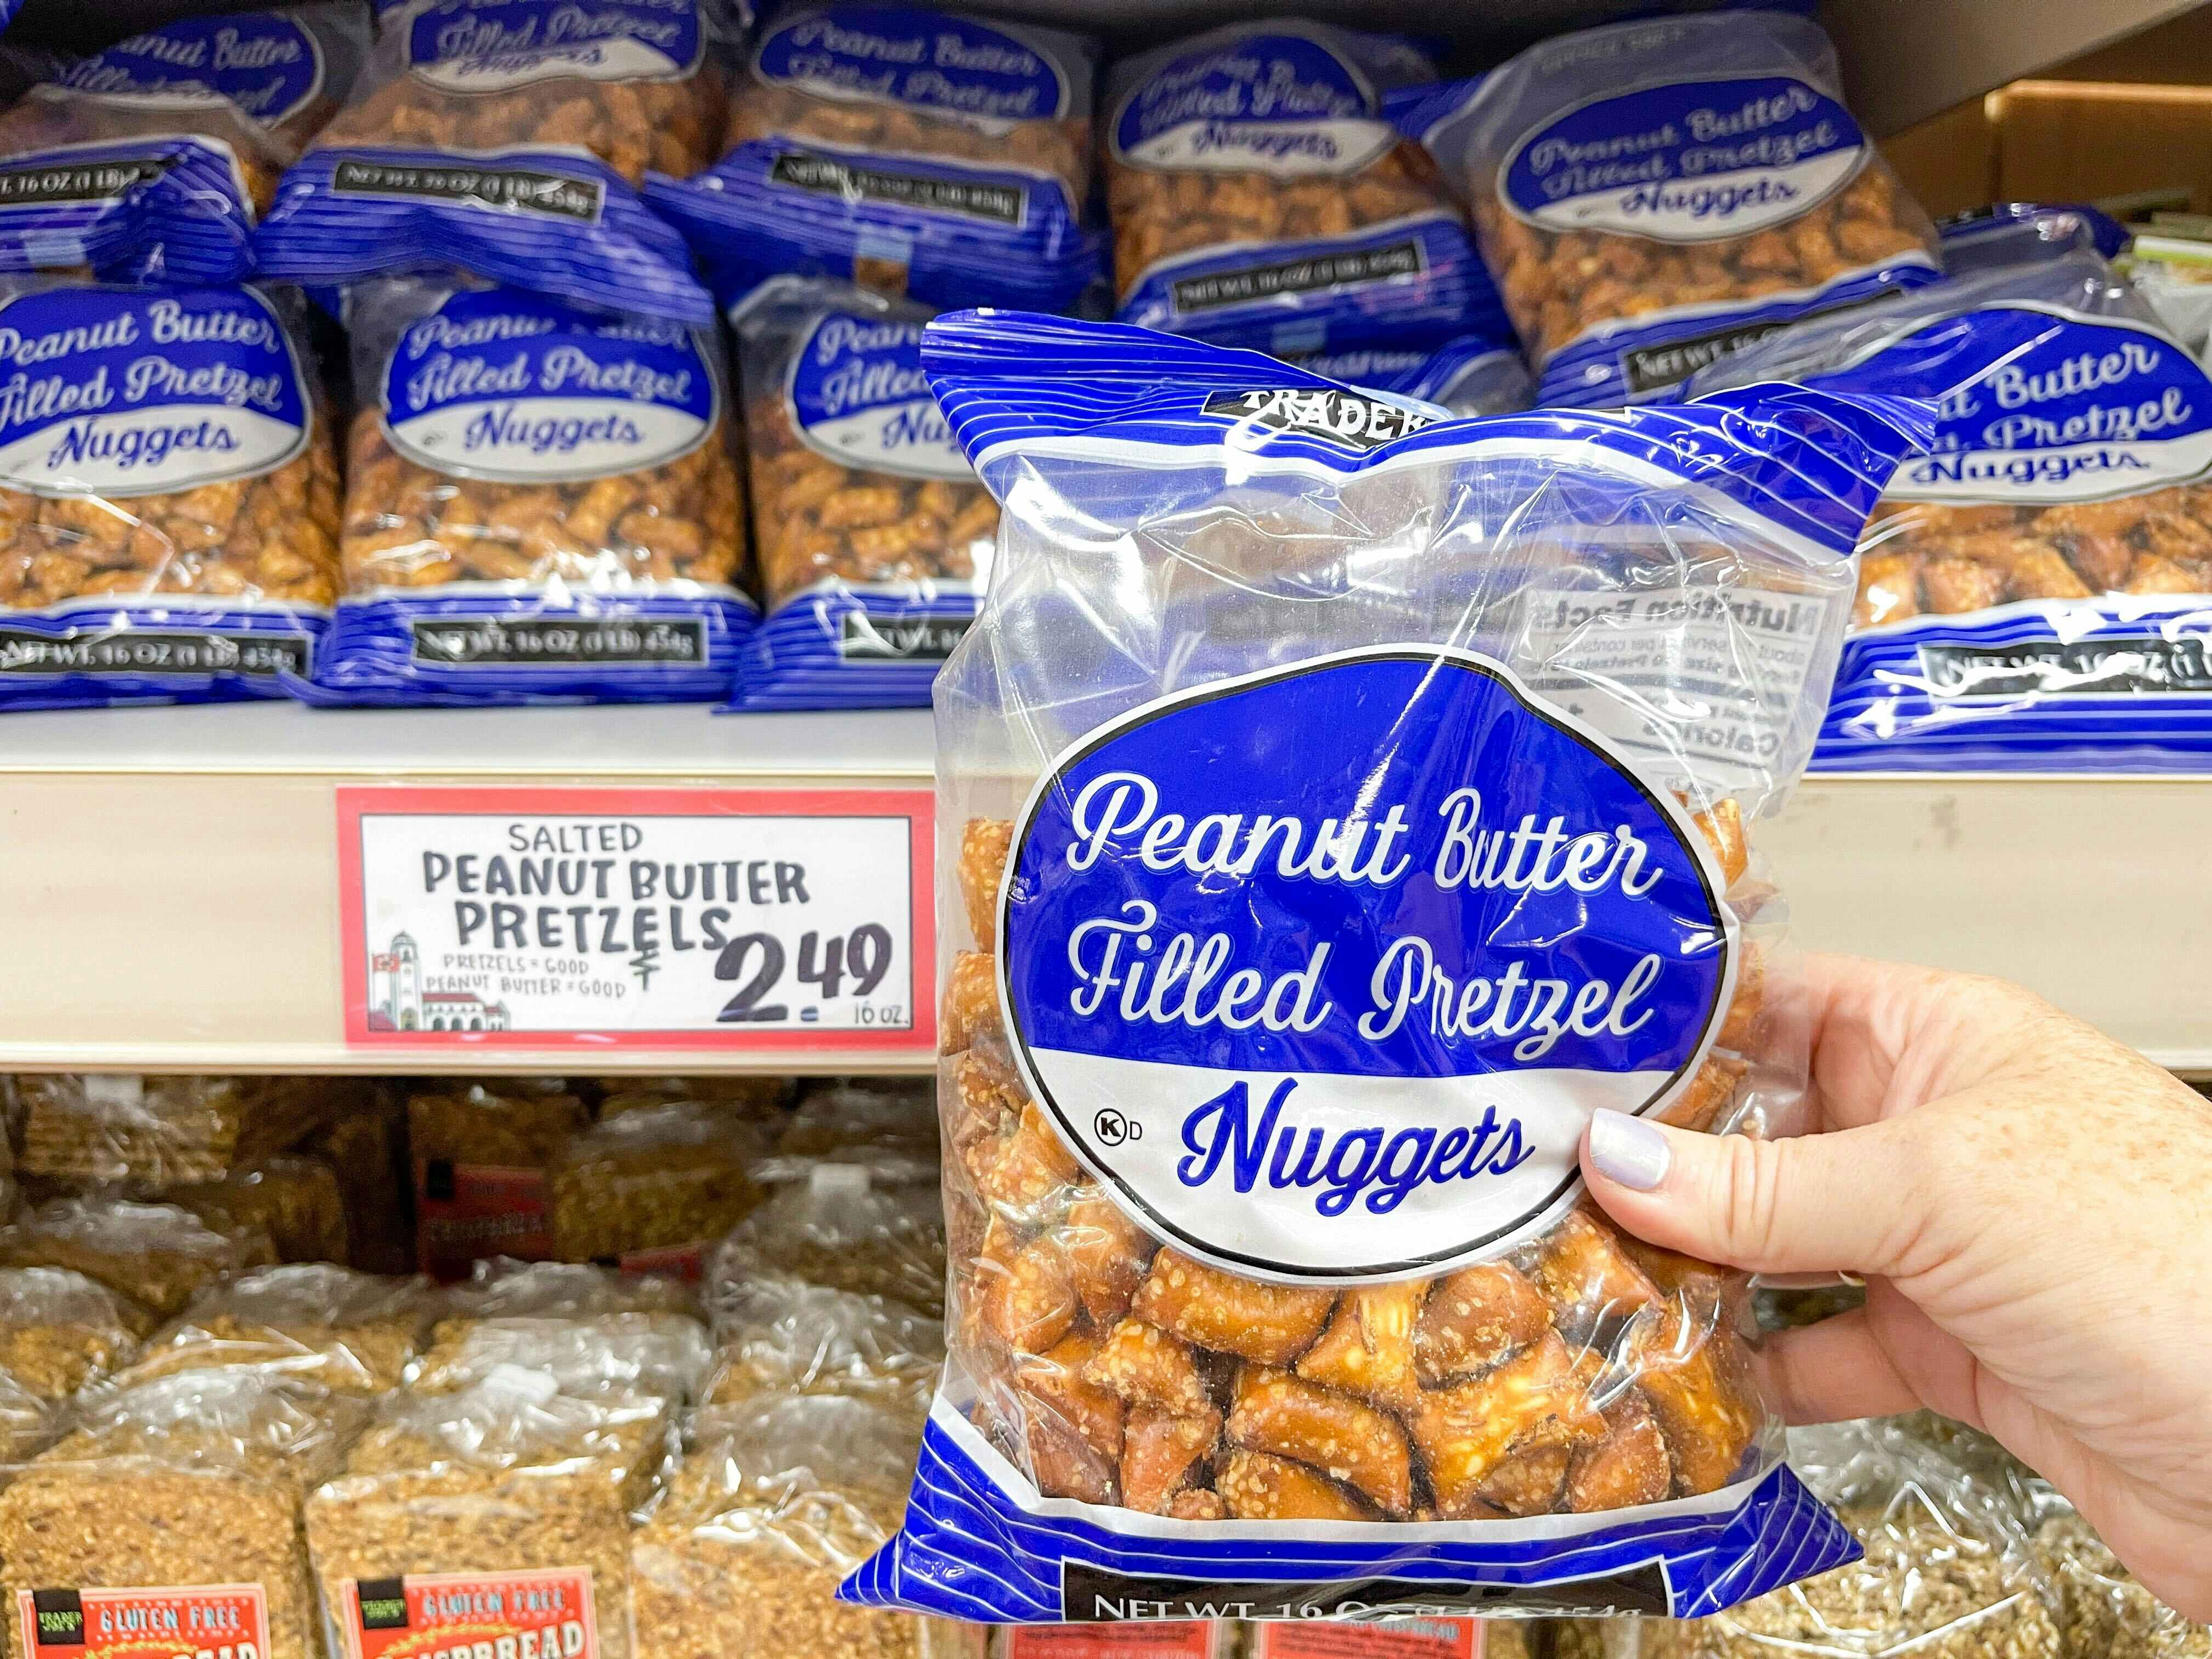 A person's hand holding a bag of Trader Joe's Peanut Butter Filled Pretzel Nuggets in front of a shelf display of them at Trader Joe's